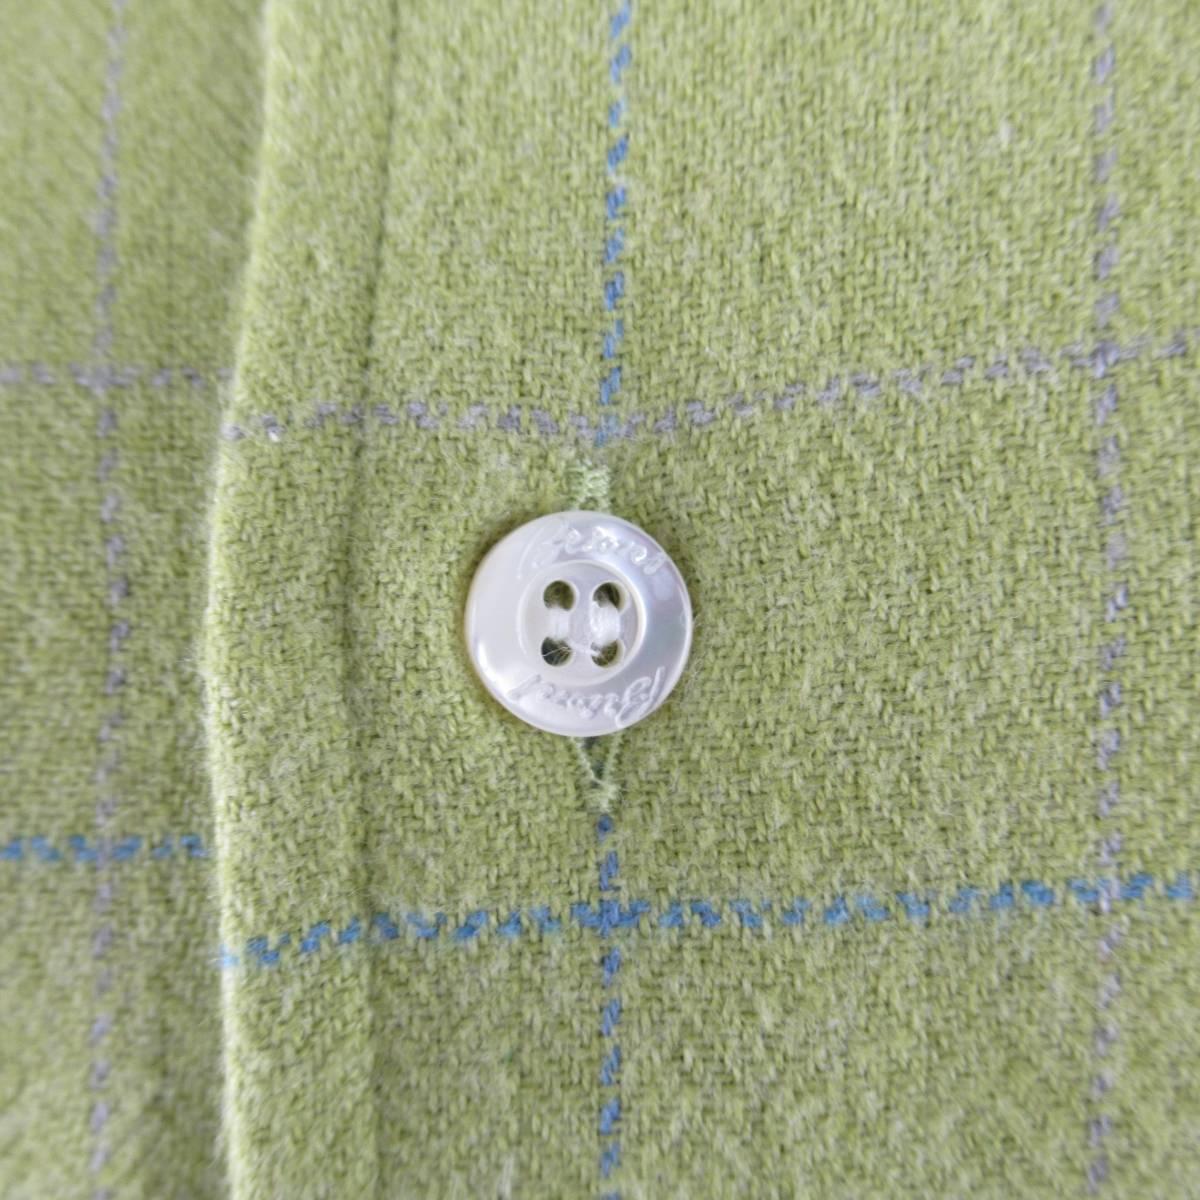 BRIONI Sport shirt comes in a light green cotton flannel with all over blue and lavender windowpane grid patter with a classic pointed collar and breast pocket. Made in Italy.
 
New with Tags.
Marked: L
 
Measurements:
 
Shoulder: 21 in.
Chest: 54